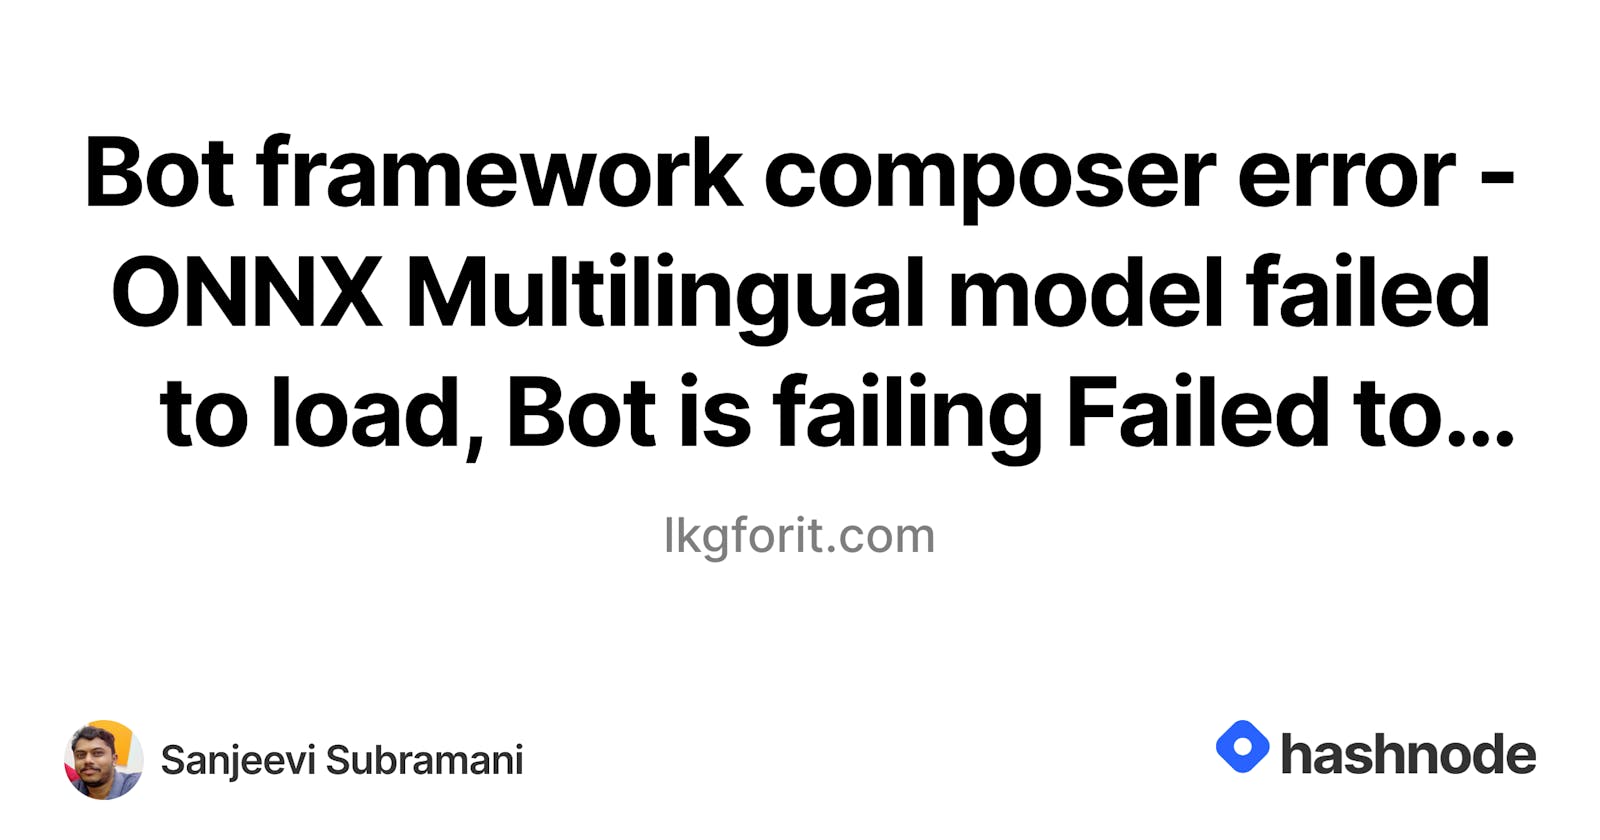 Bot framework composer error - ONNX Multilingual model failed to load, Bot is failing Failed to find or load Model with path